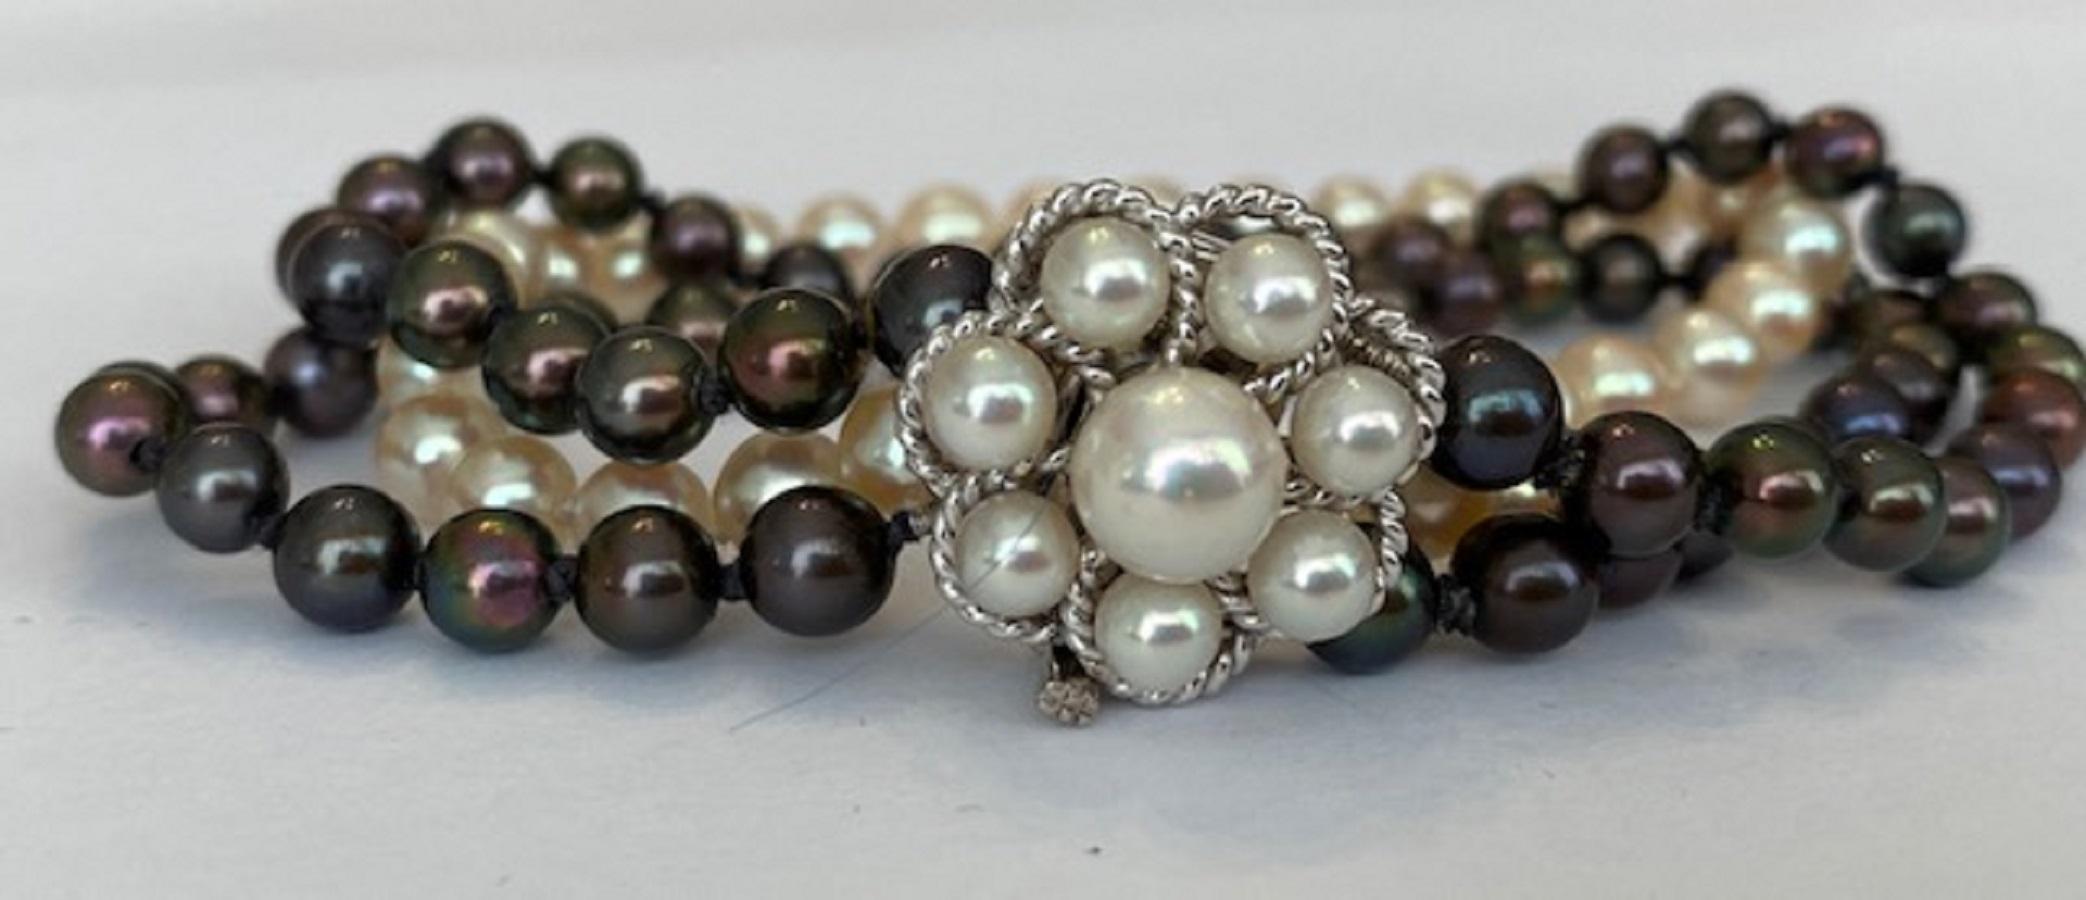 Uncut Pearl Bracelet Circa 1970 s Cultured Pearls Gold Clasp For Sale